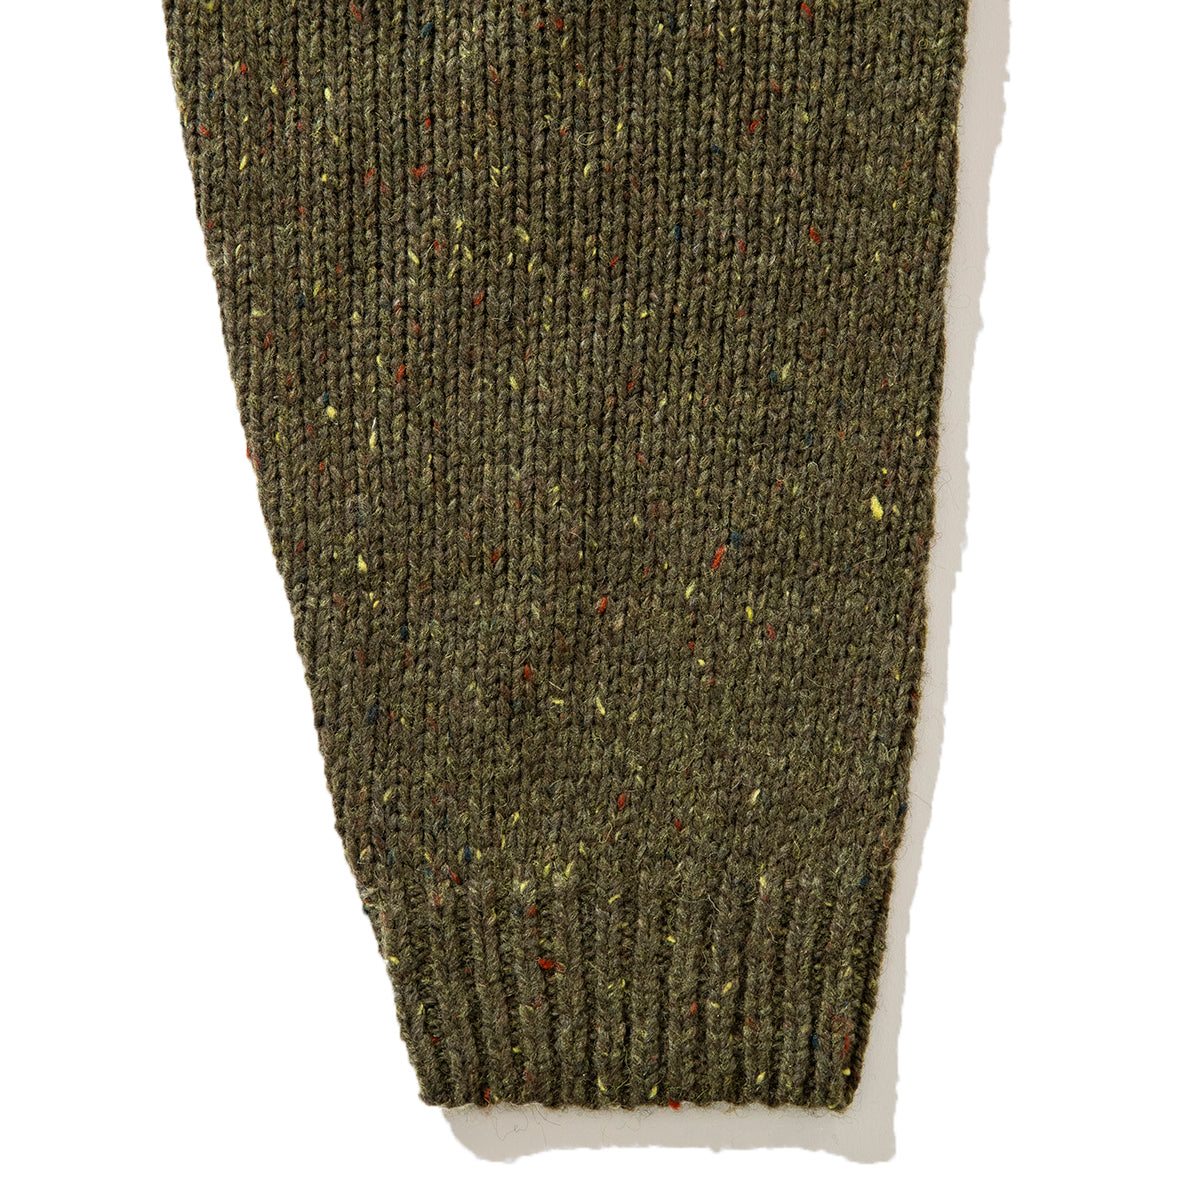 MIX TWEED ELBOW PATCH KNIT